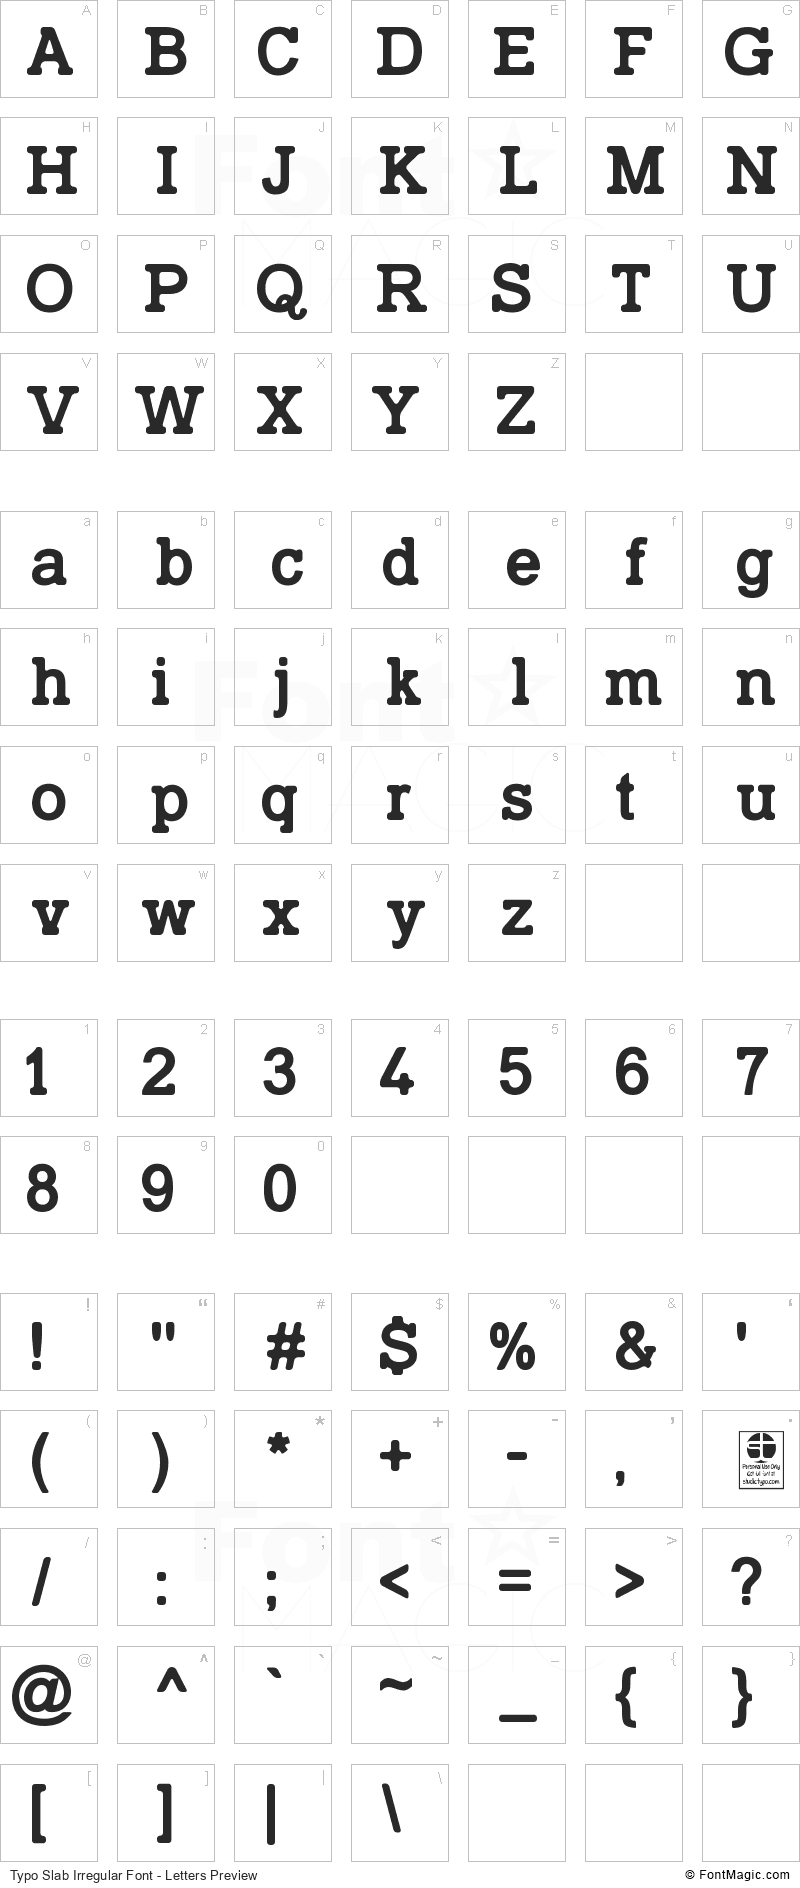 Typo Slab Irregular Font - All Latters Preview Chart